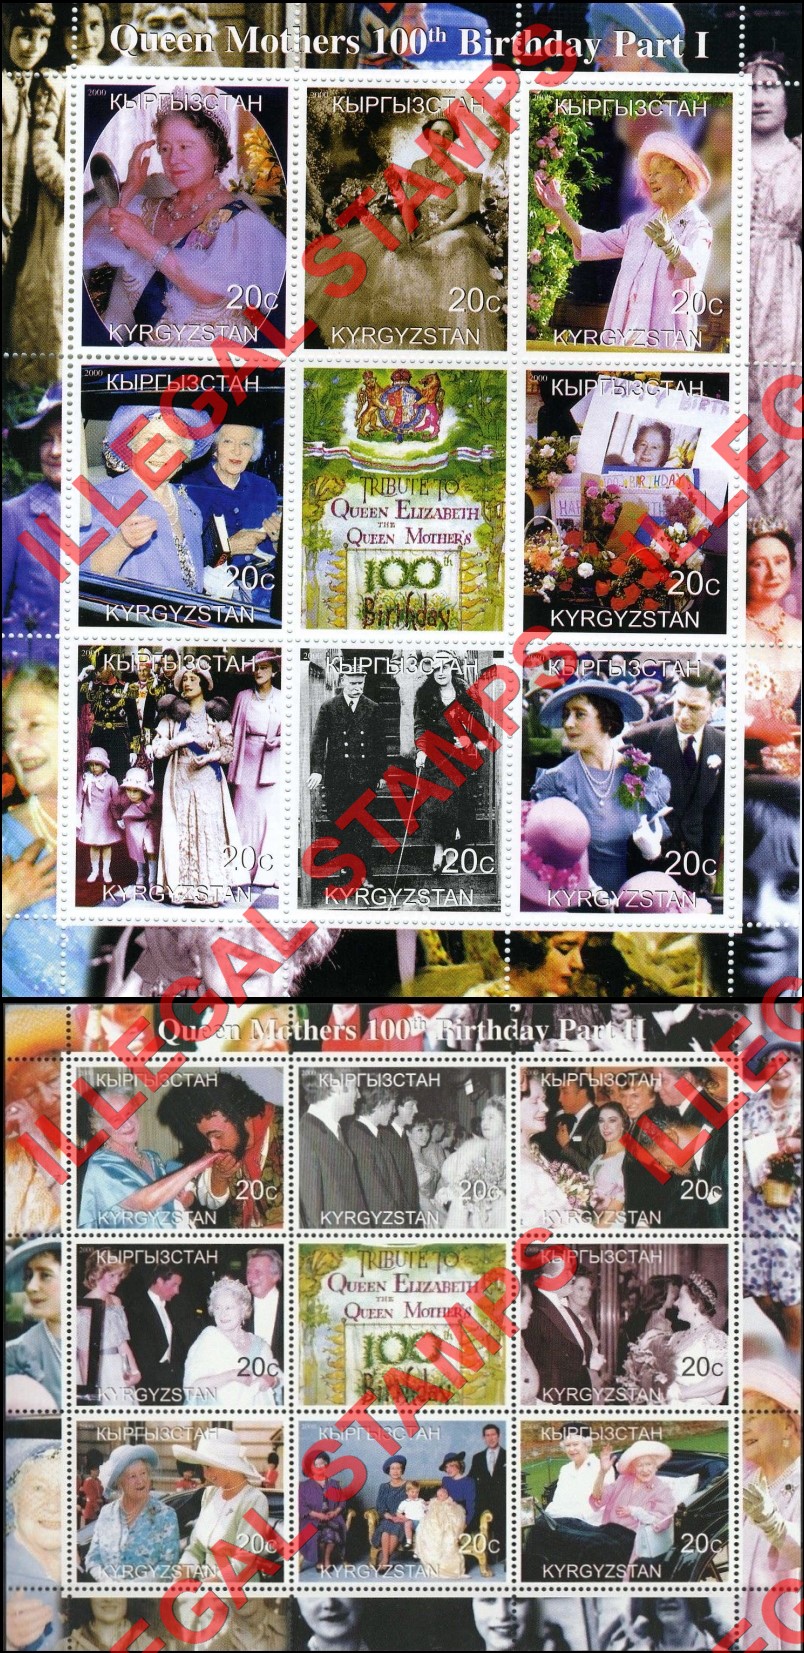 Kyrgyzstan 2000 Queen Mother's 100th Birthday Illegal Stamp Sheetlets of 8 Plus Label Part I and II